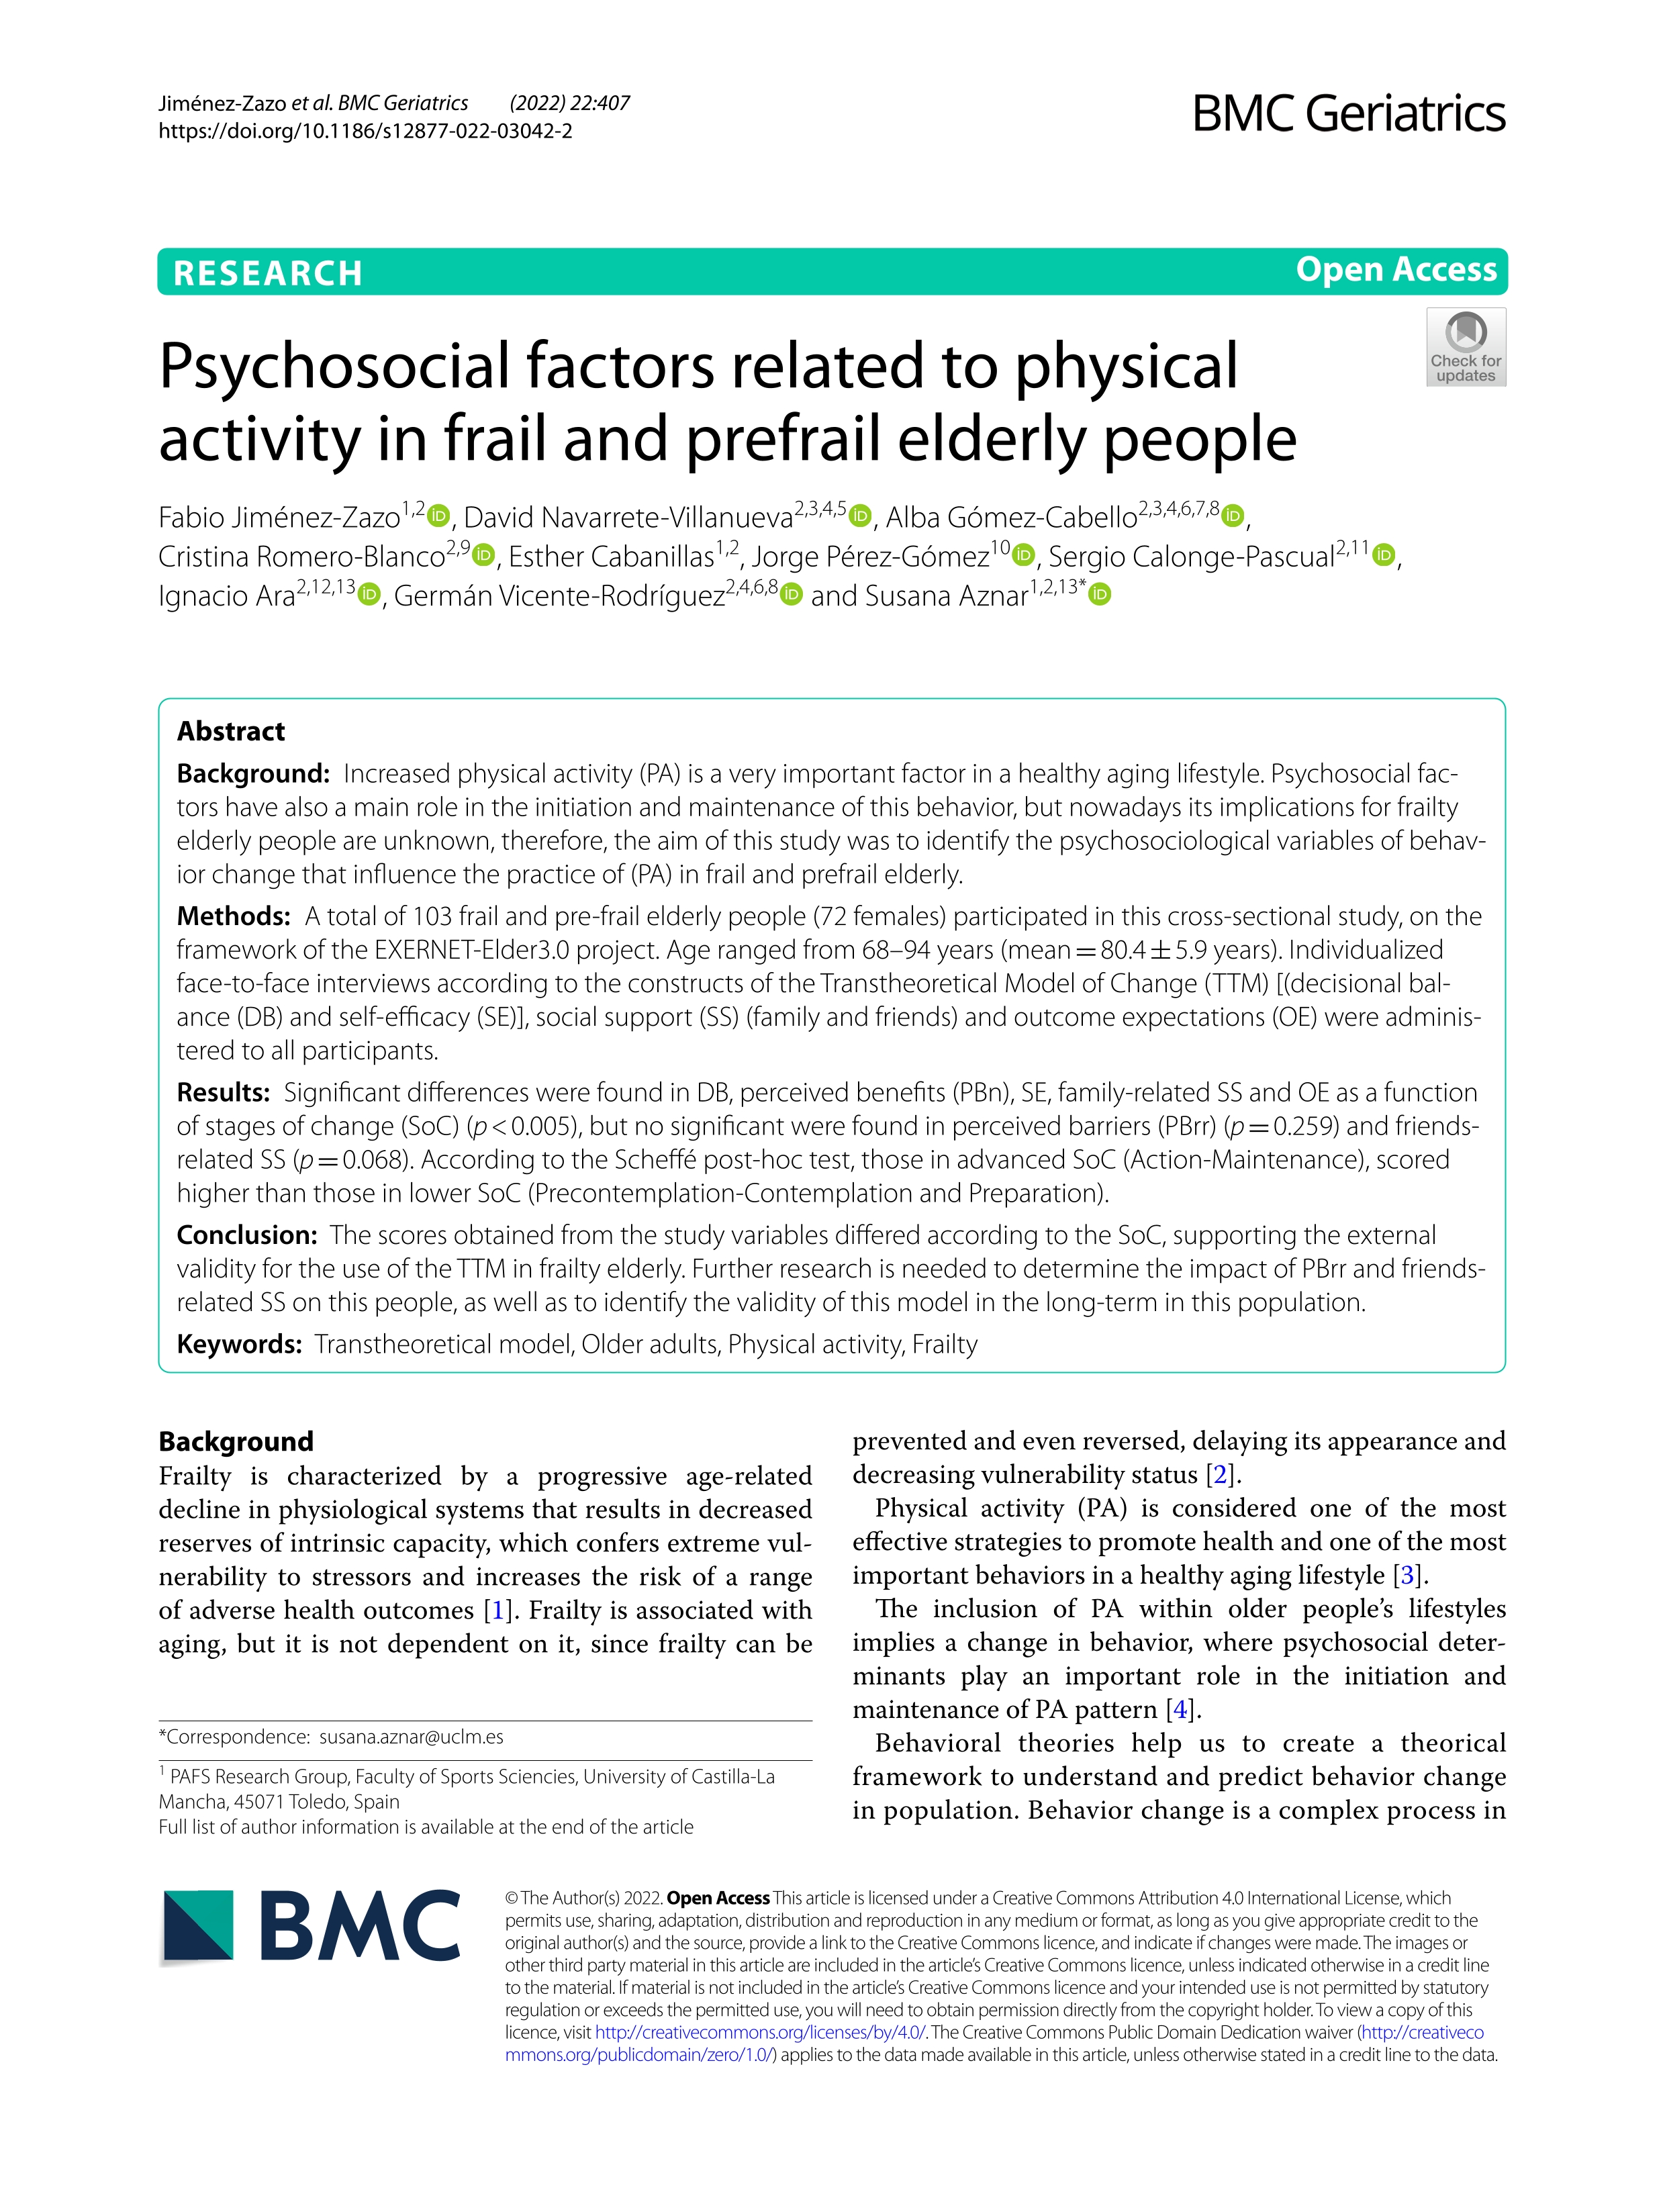 Psychosocial factors related to physical activity in frail and prefrail elderly people